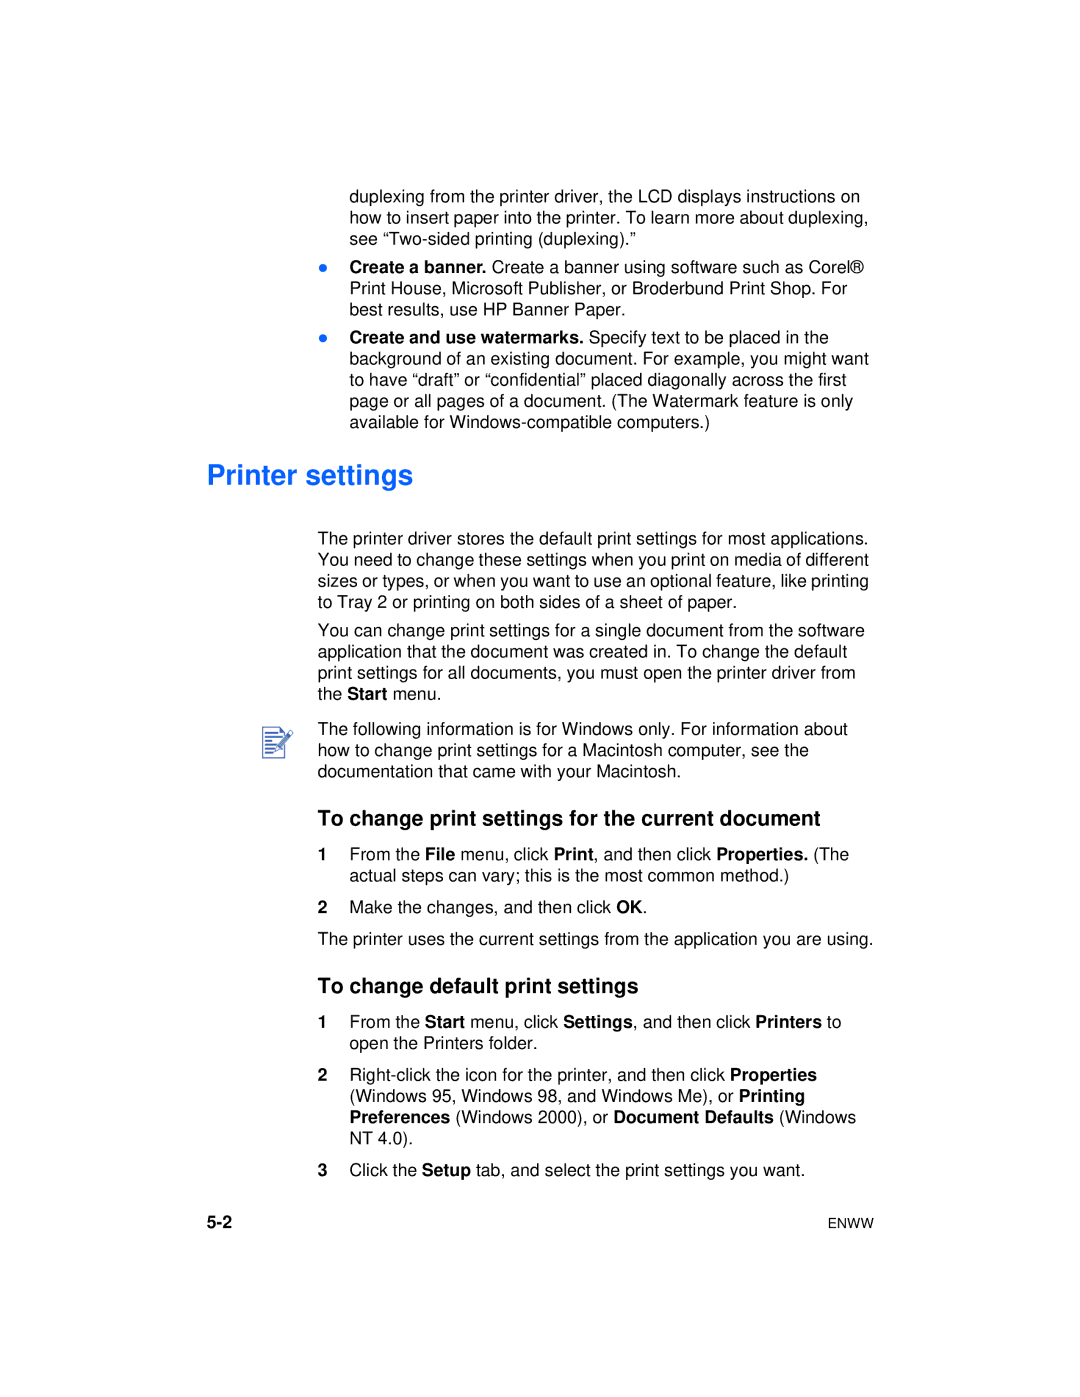 HP Color Inkjet cp1700 manual Printer settings, To change print settings for the current document 